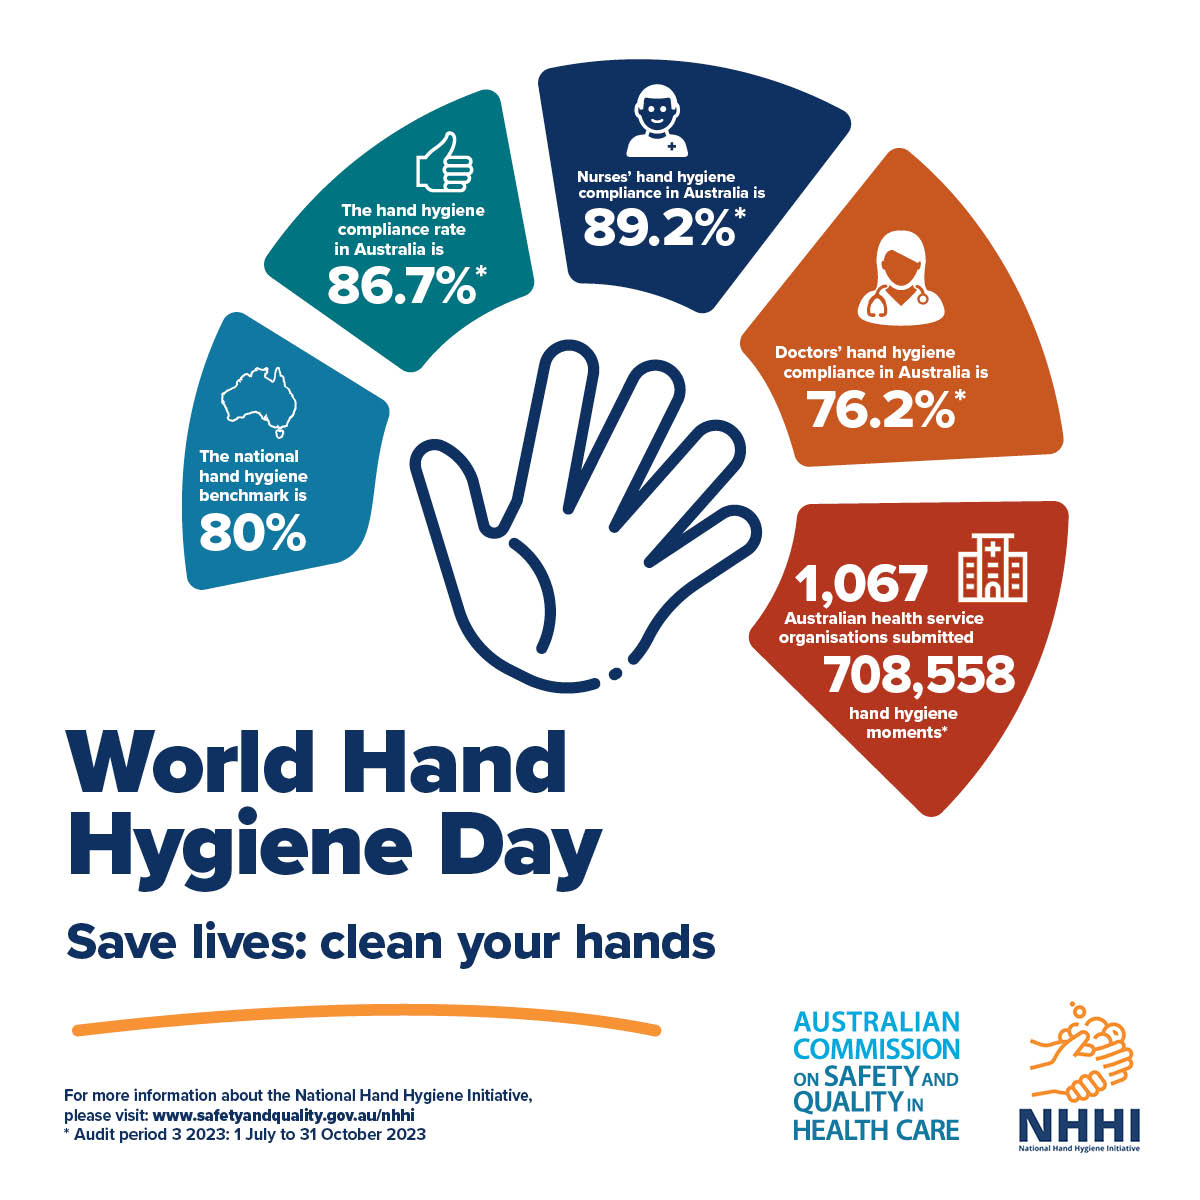 Today 5 May is #WorldHandHygieneDay. Podiatrists practice hand hygiene as part of infection control every day. Be a champion and mentor for hand hygiene this World Hand Hygiene Day. Find resources to help spread the word via @ACSQHC's website: bit.ly/3xWbhv4 #WHHD